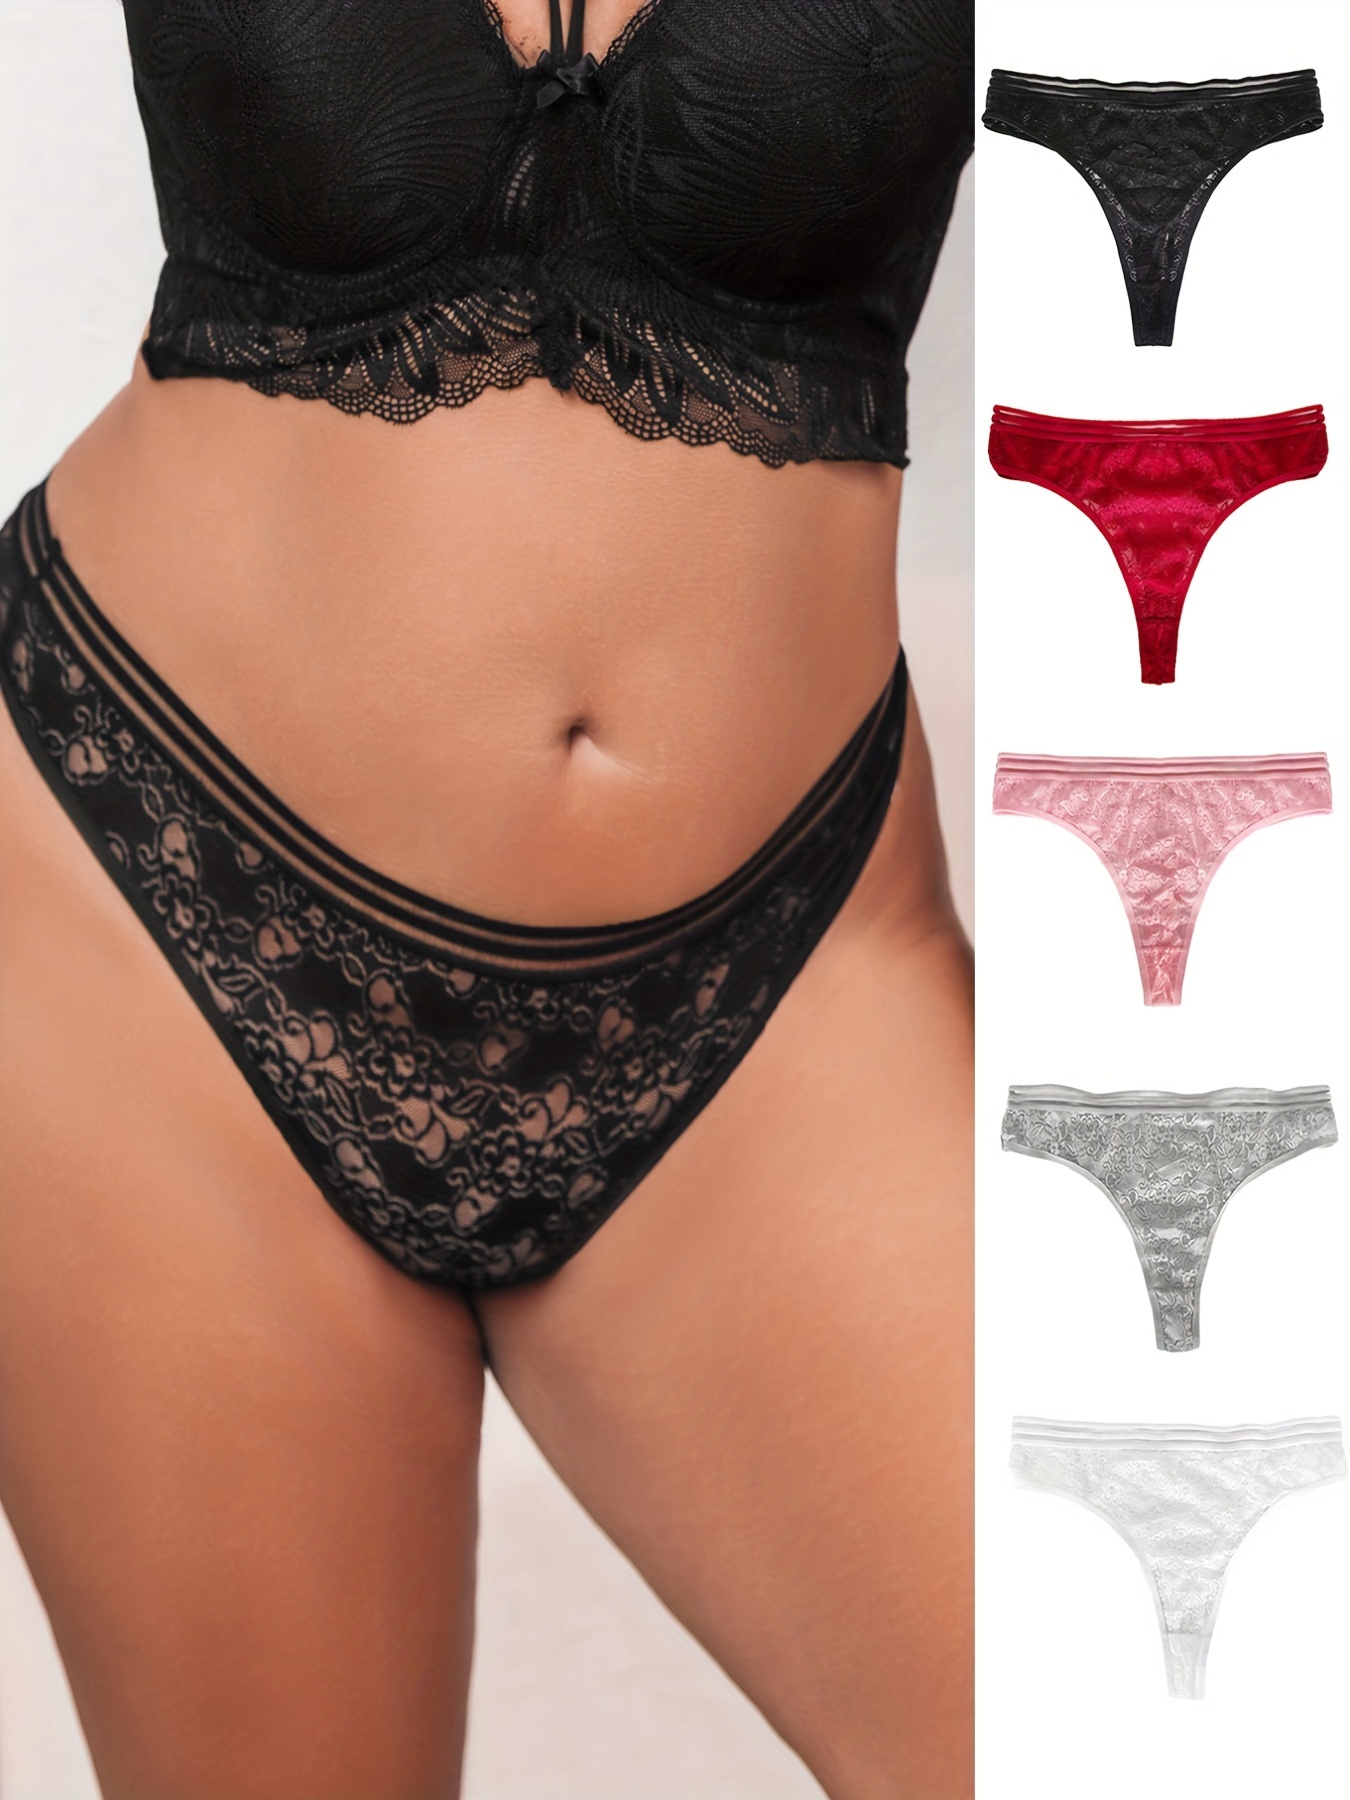 Women's 5pcs Panties Set, Sheer Lace T-Back Underwear, Low Rise Thong for  Sex, Hollow Out Cutie Undies Pack of 5 